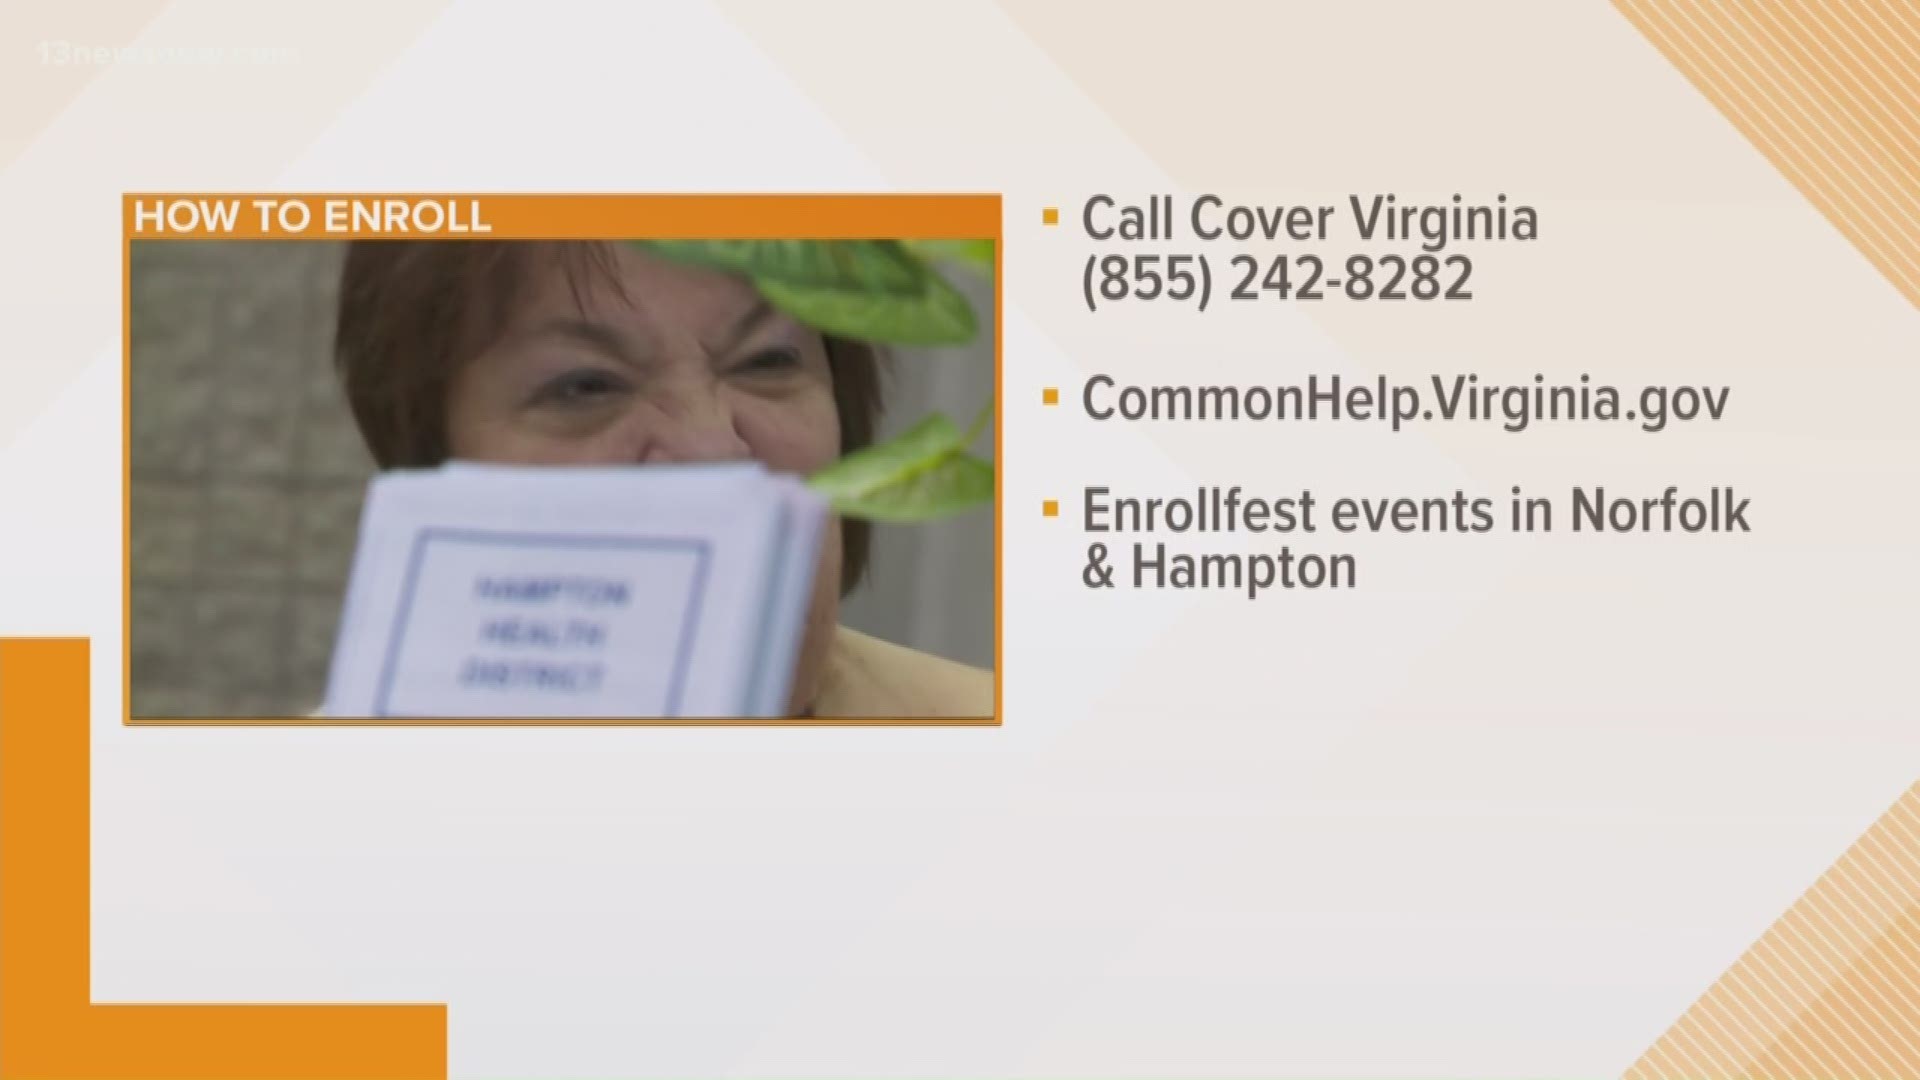 This year, more than 400,000 Virginians are eligible for Medicaid coverage.